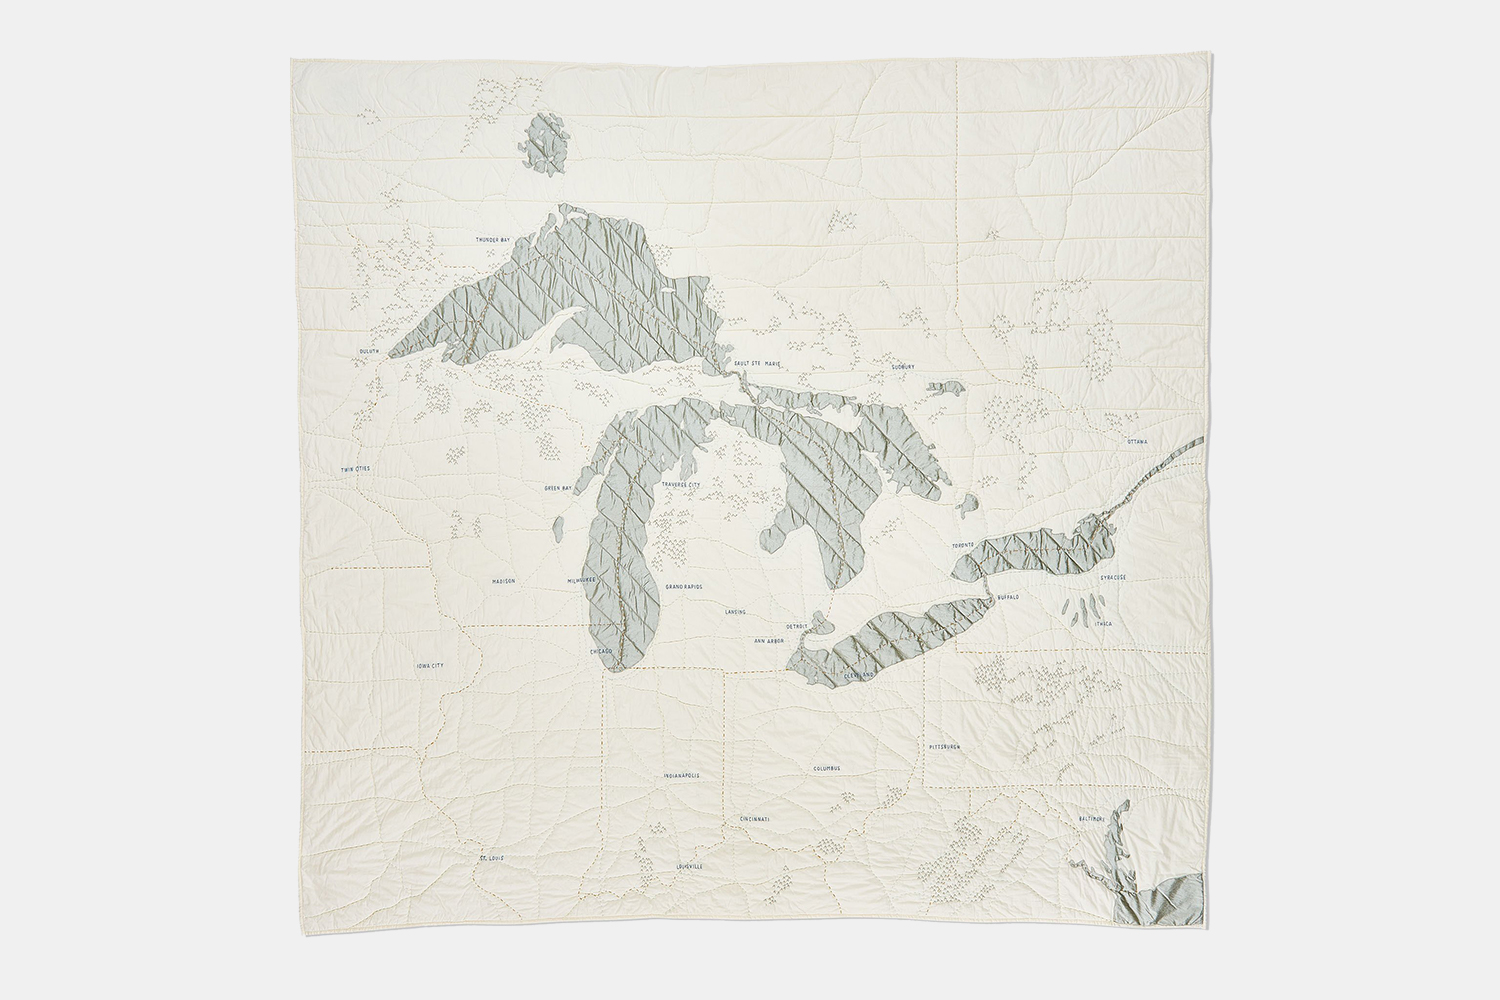 Haptic Lab Great Lakes Quilt